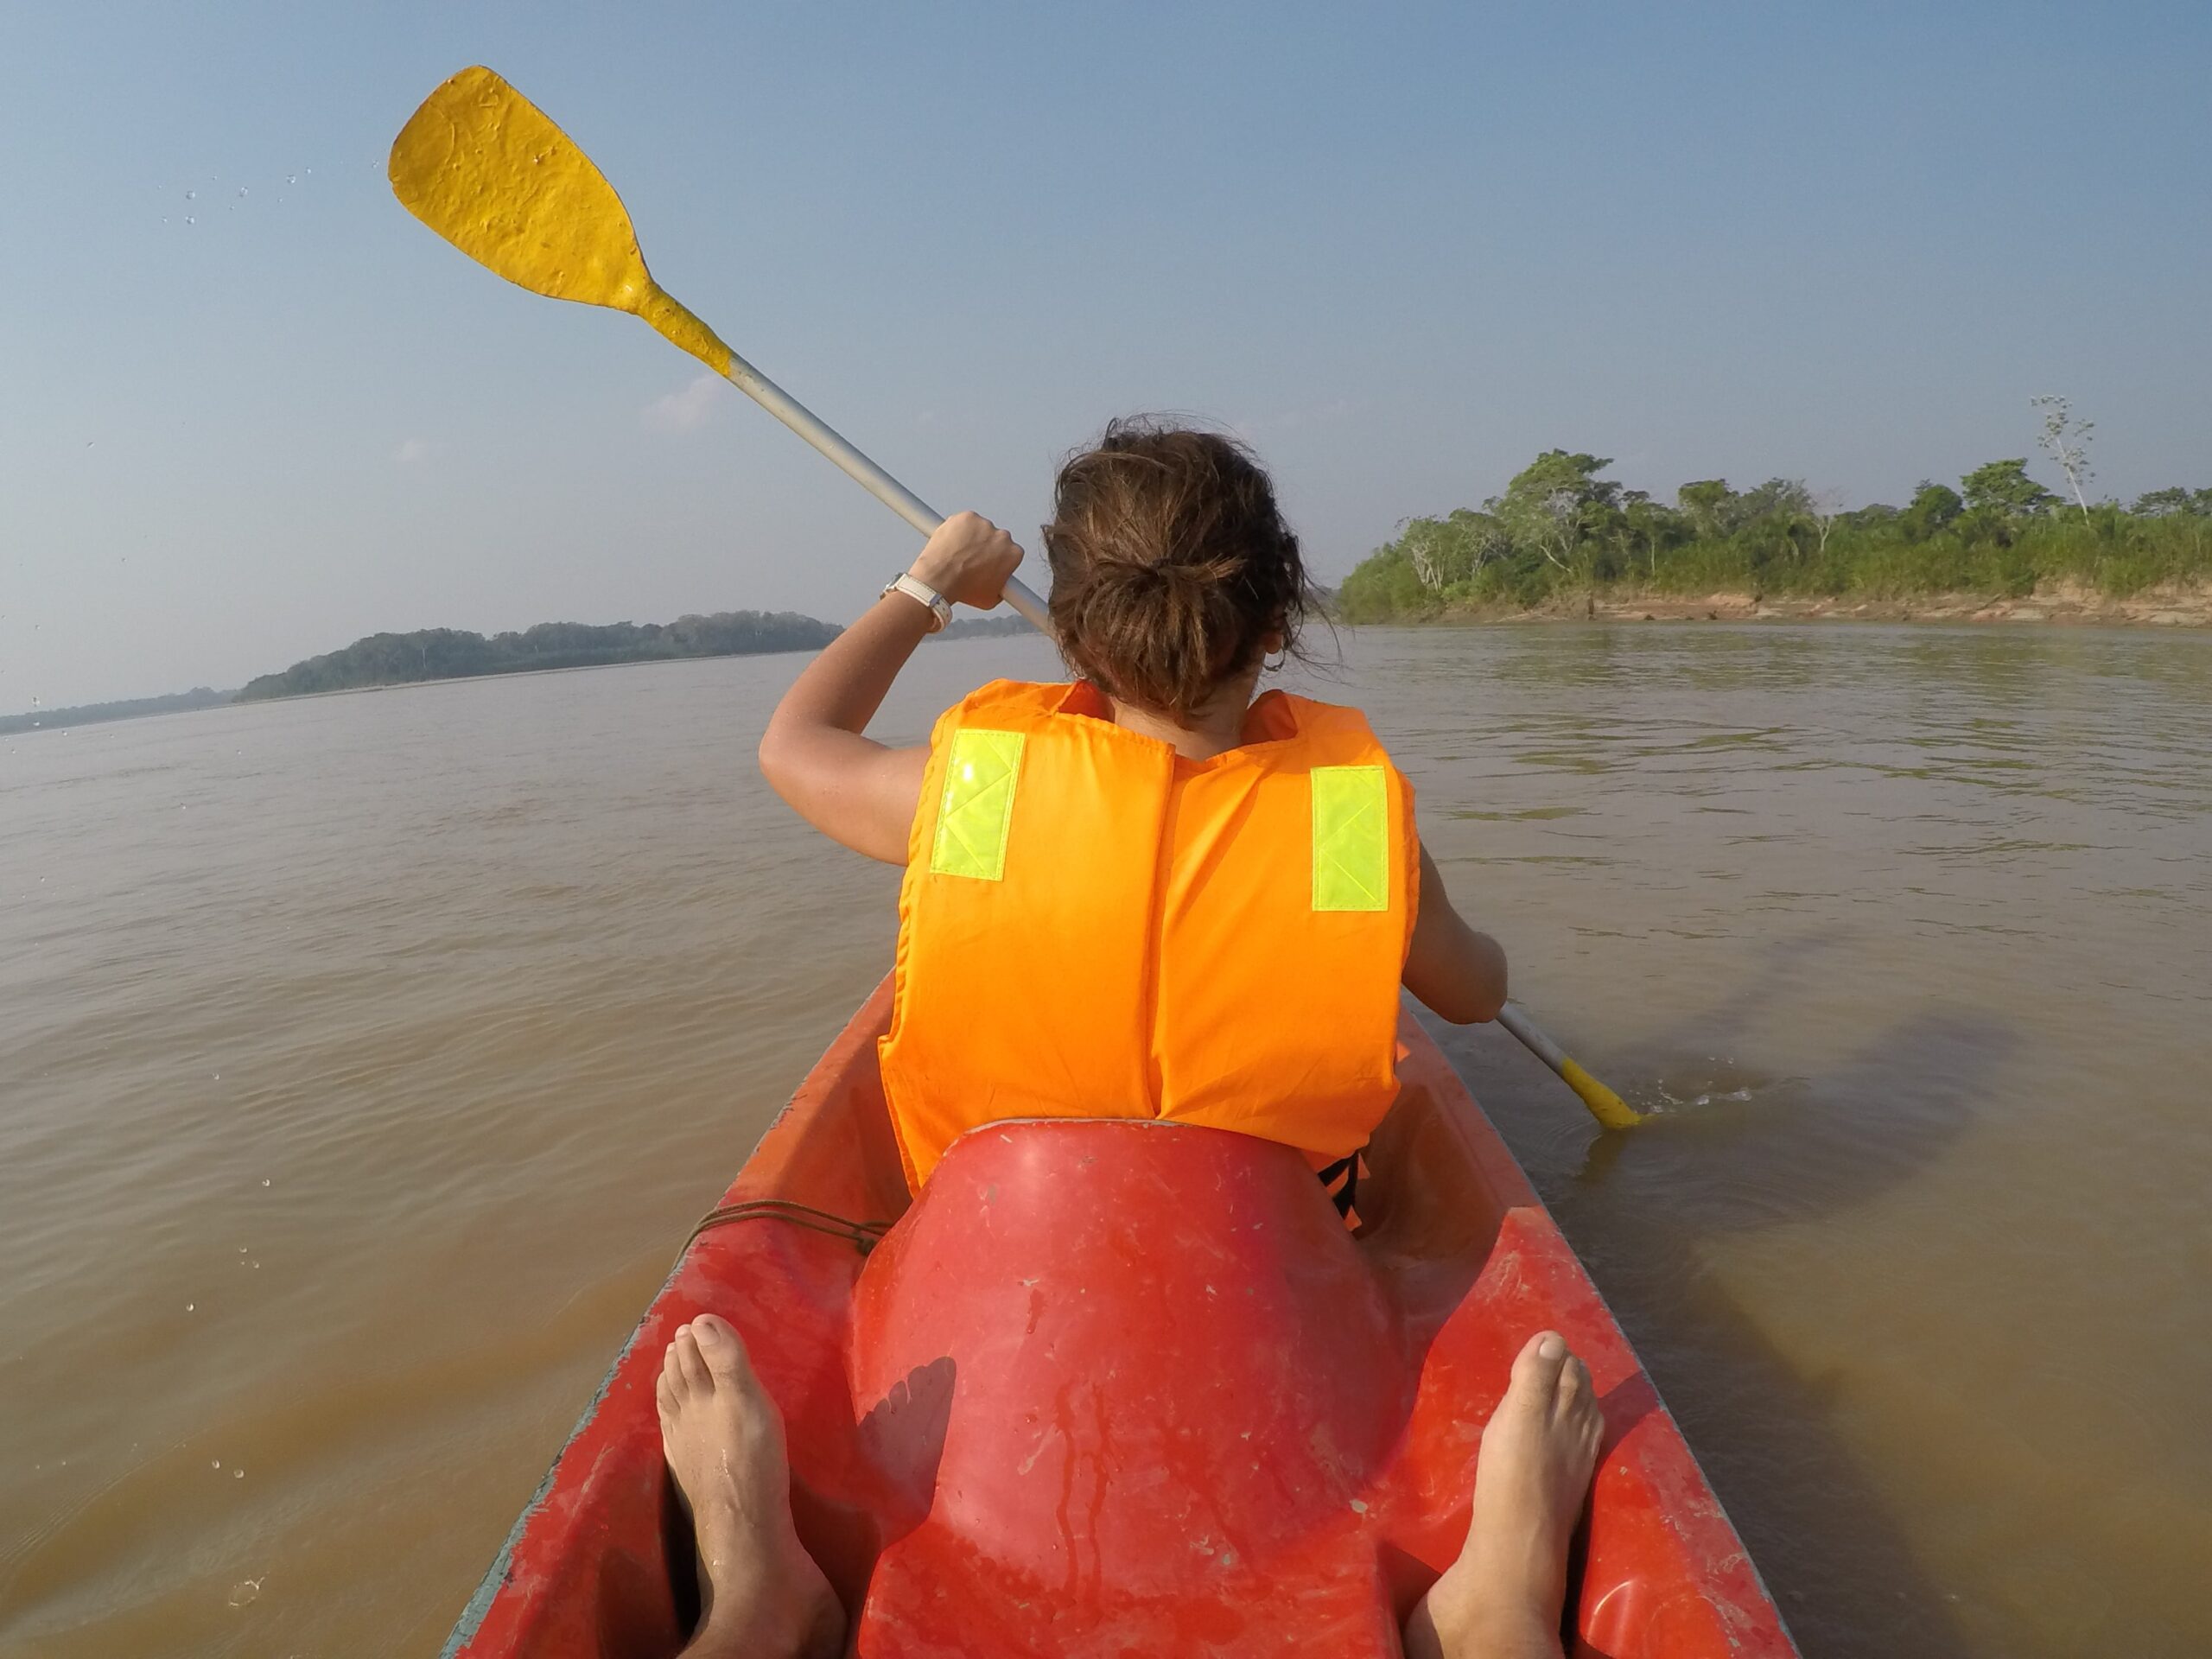 In the Amazon, A tourist woman kayaking on the Madre de Dios river in the Amazon of Peru